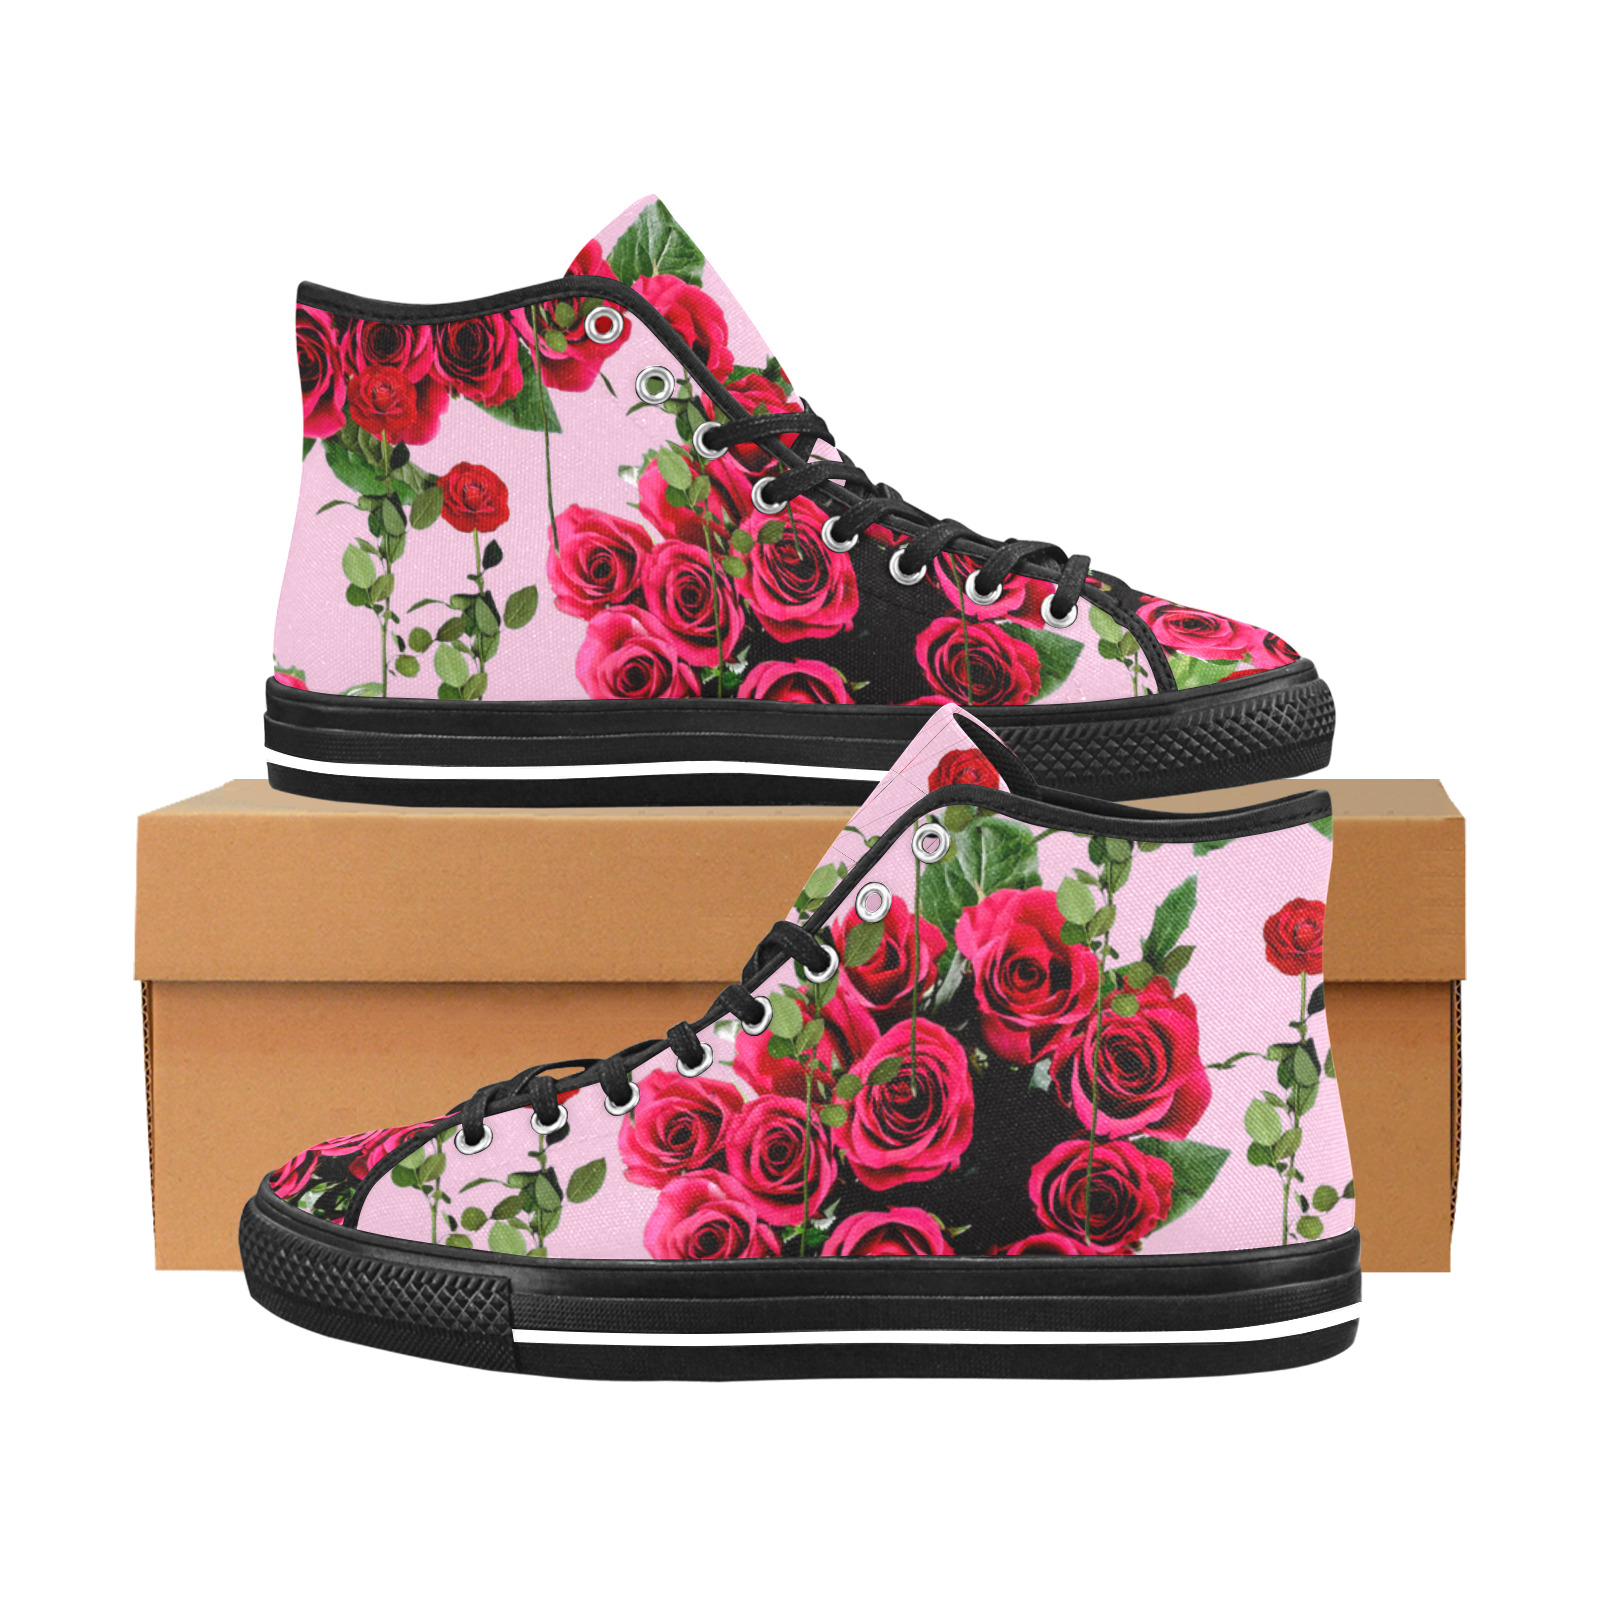 roses pink Vancouver H Women's Canvas Shoes (1013-1)